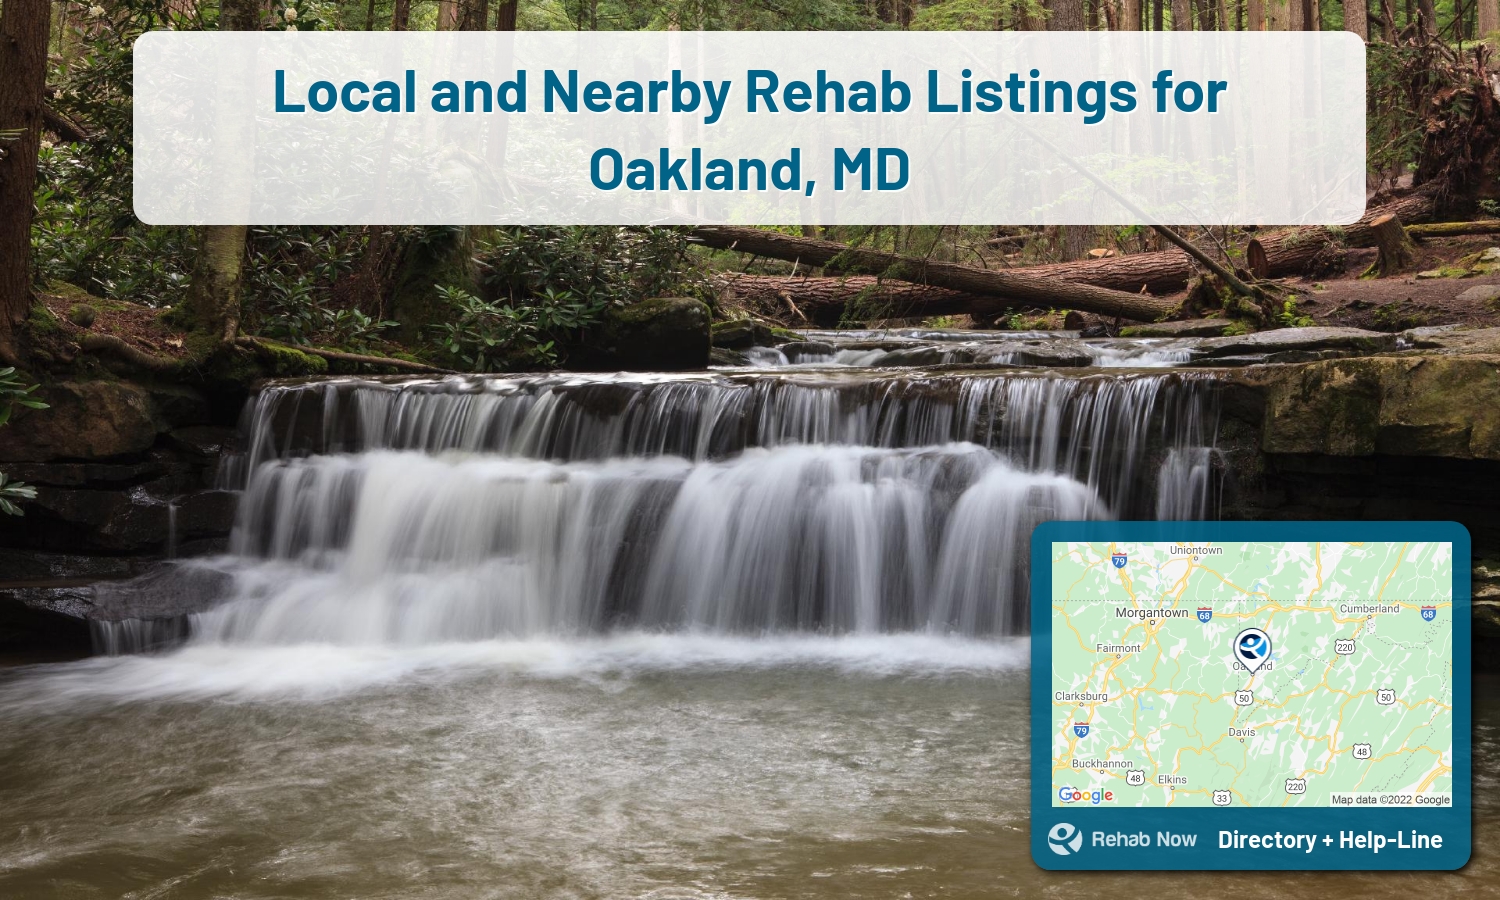 Oakland, MD Treatment Centers. Find drug rehab in Oakland, Maryland, or detox and treatment programs. Get the right help now!